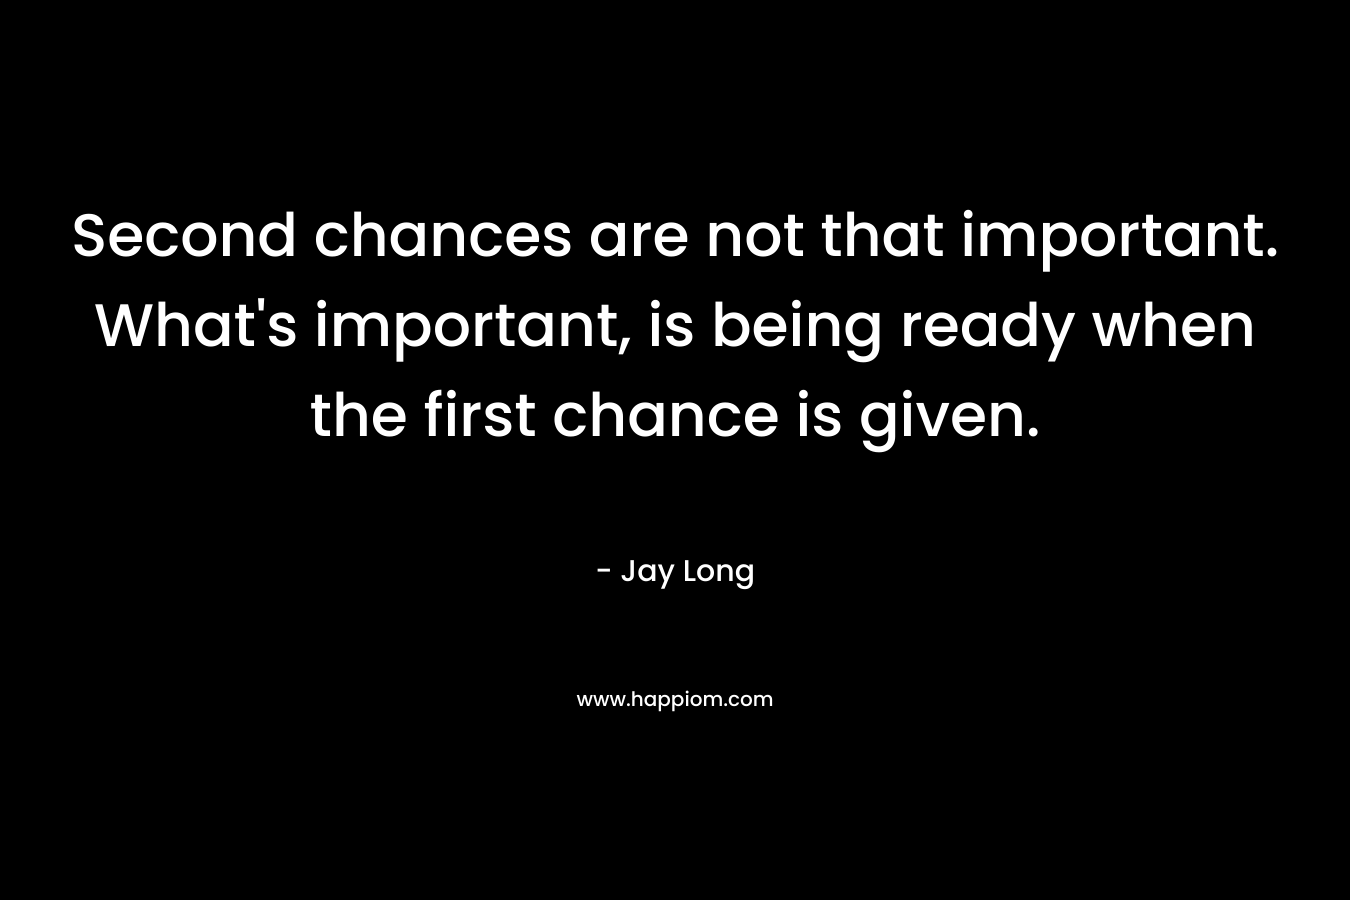 Second chances are not that important. What's important, is being ready when the first chance is given.